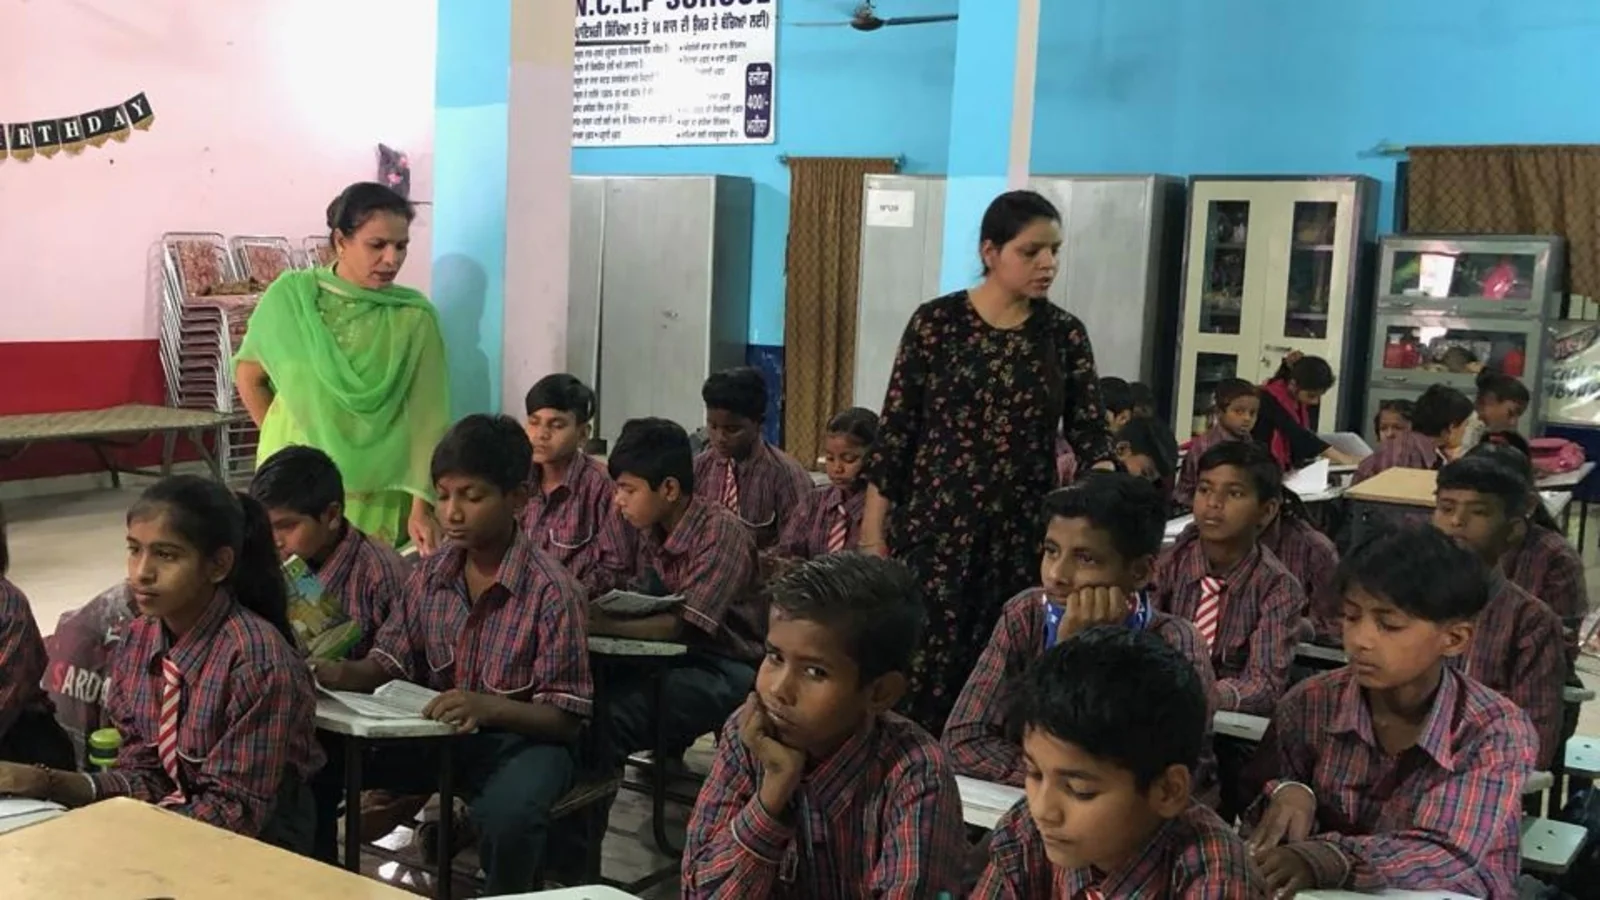 Daily brief: Centre says teaching regional languages ‘unnecessary burden’, and all the latest news